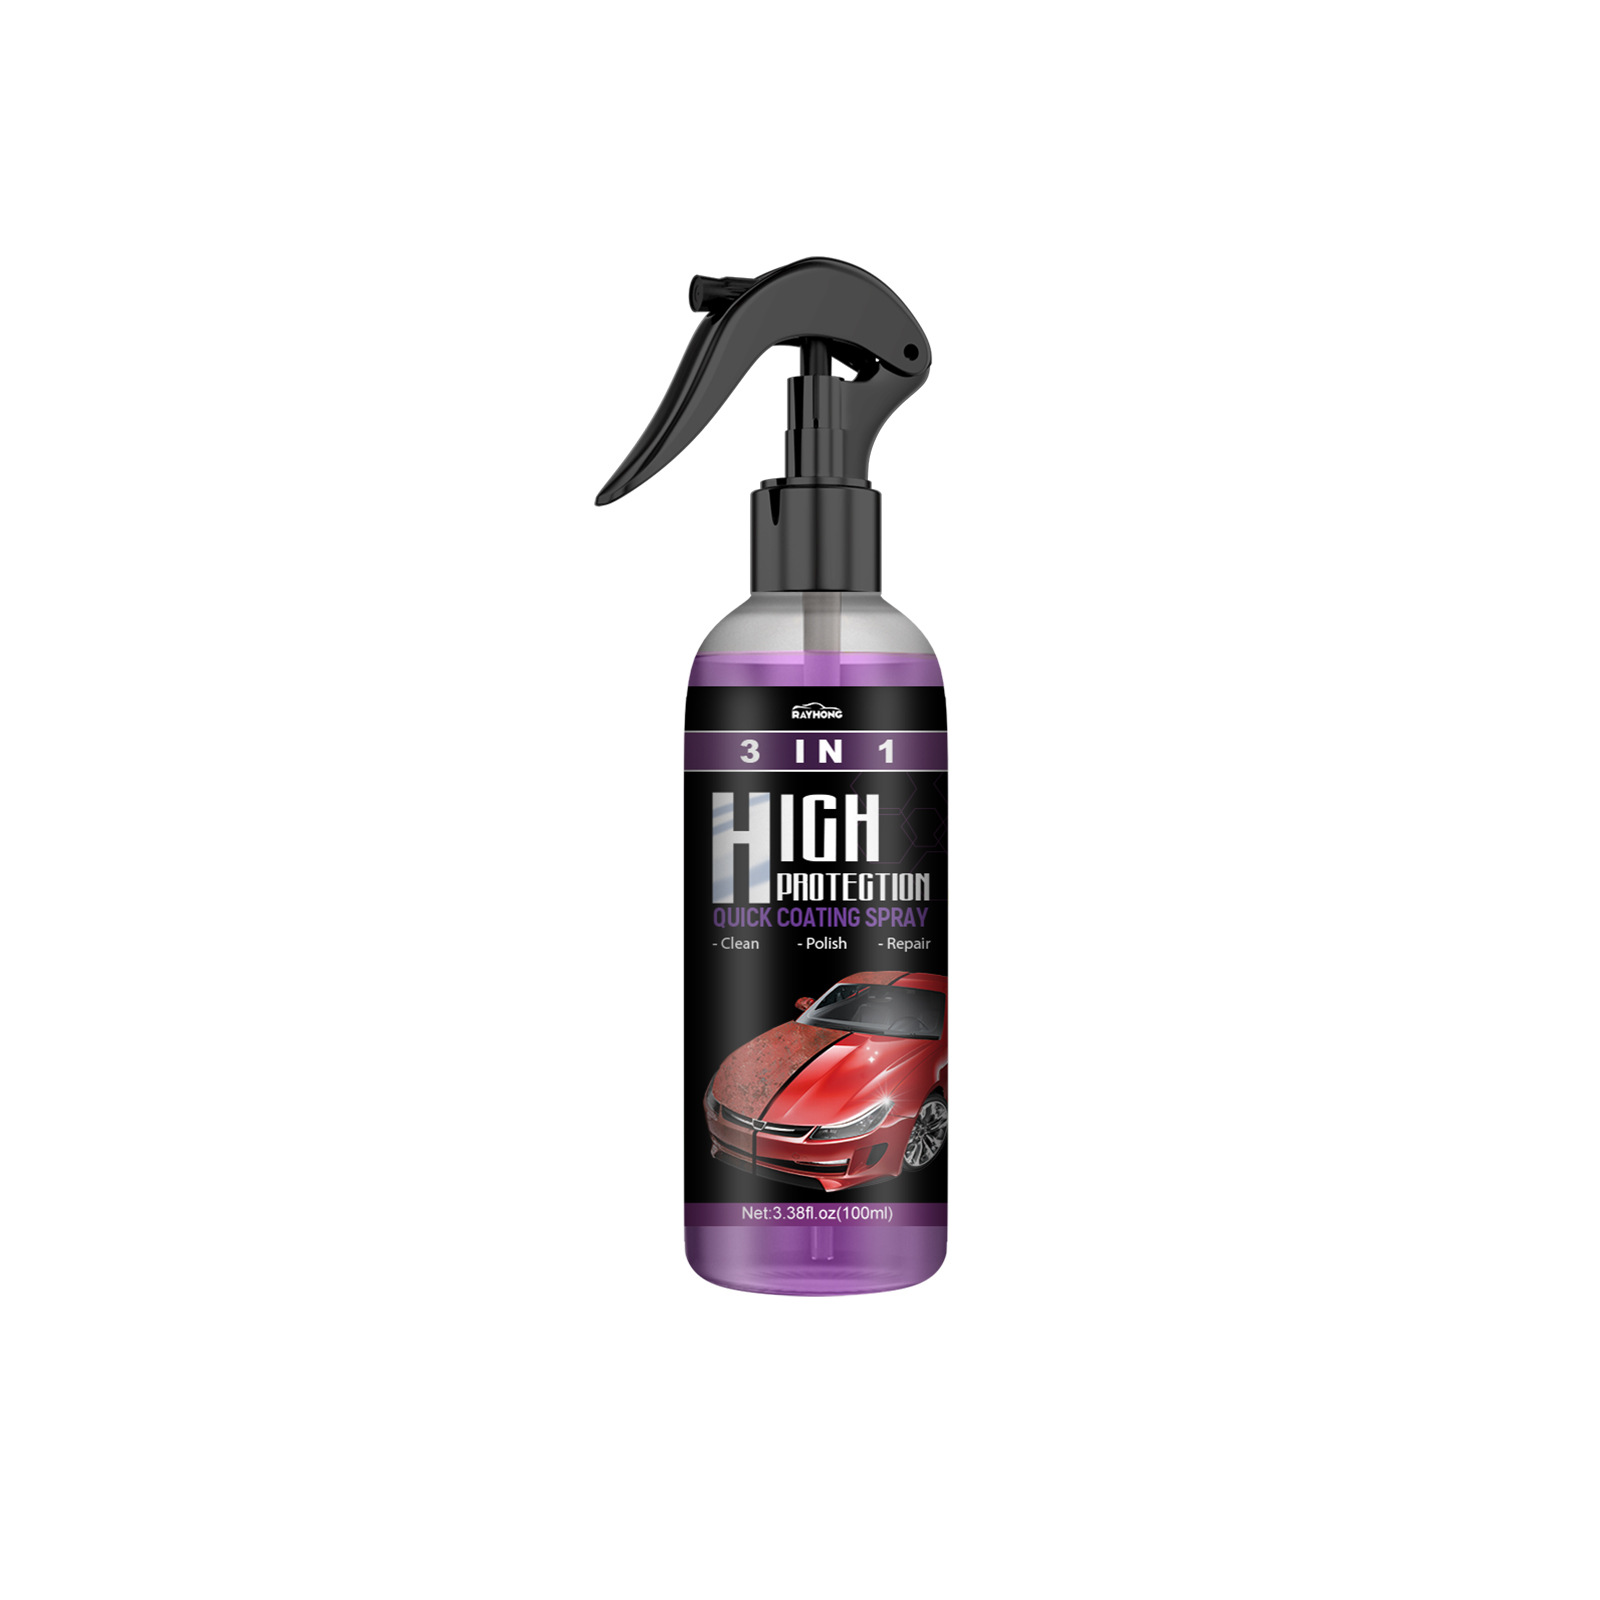 Rayhong 3 in 1 High Protection Fast Car Paint Spray Automatic Hand Paint Color Changing Cleaning Coating Spray